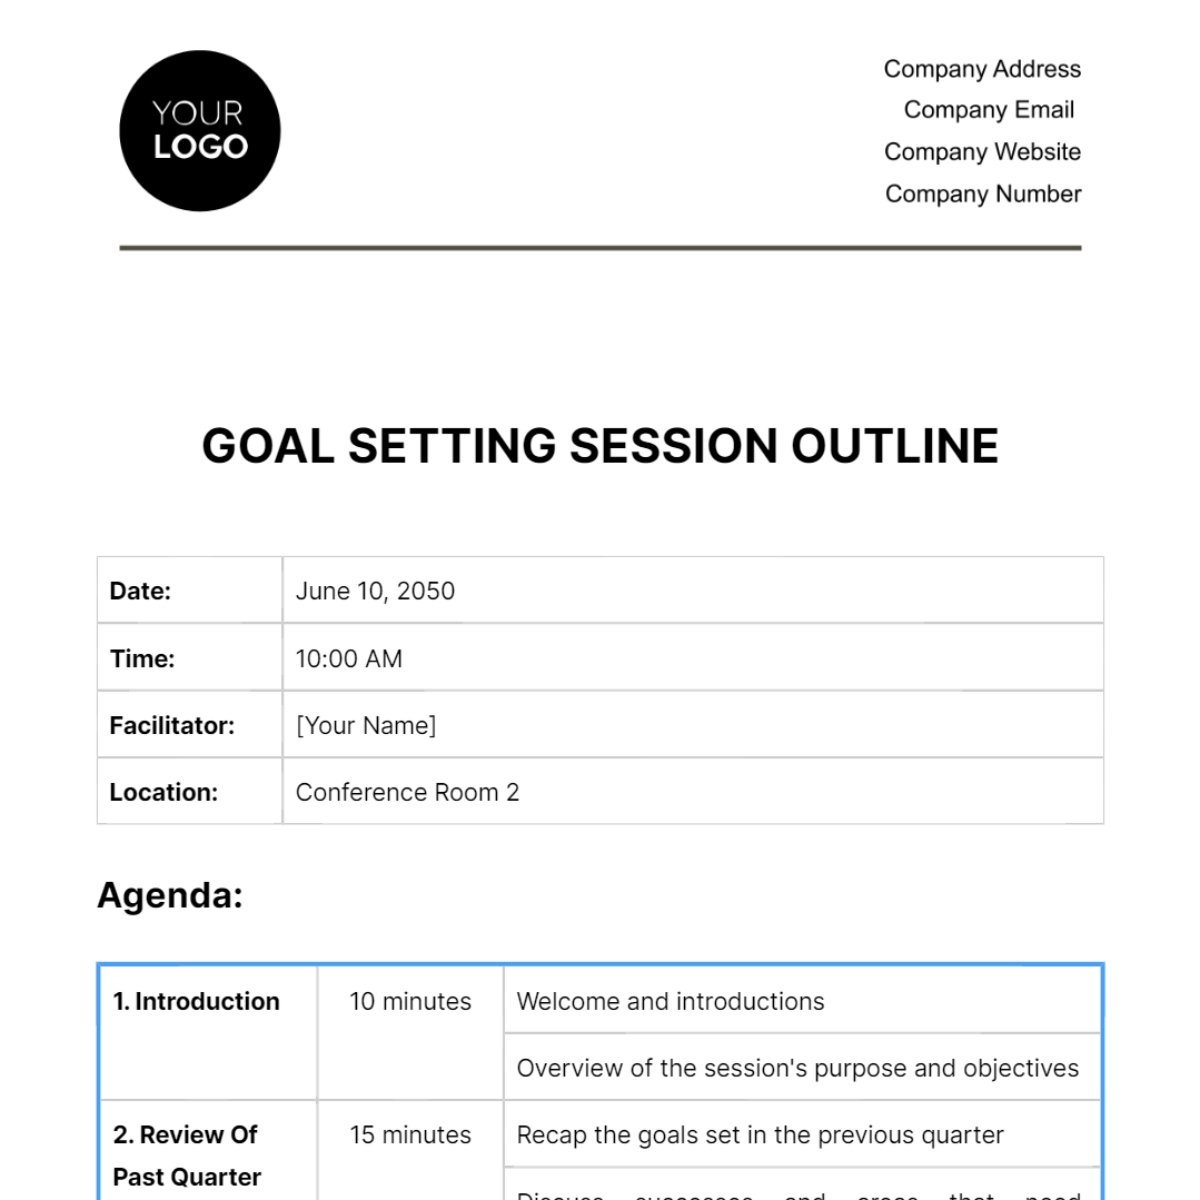 Goal Setting Session Outline HR Template